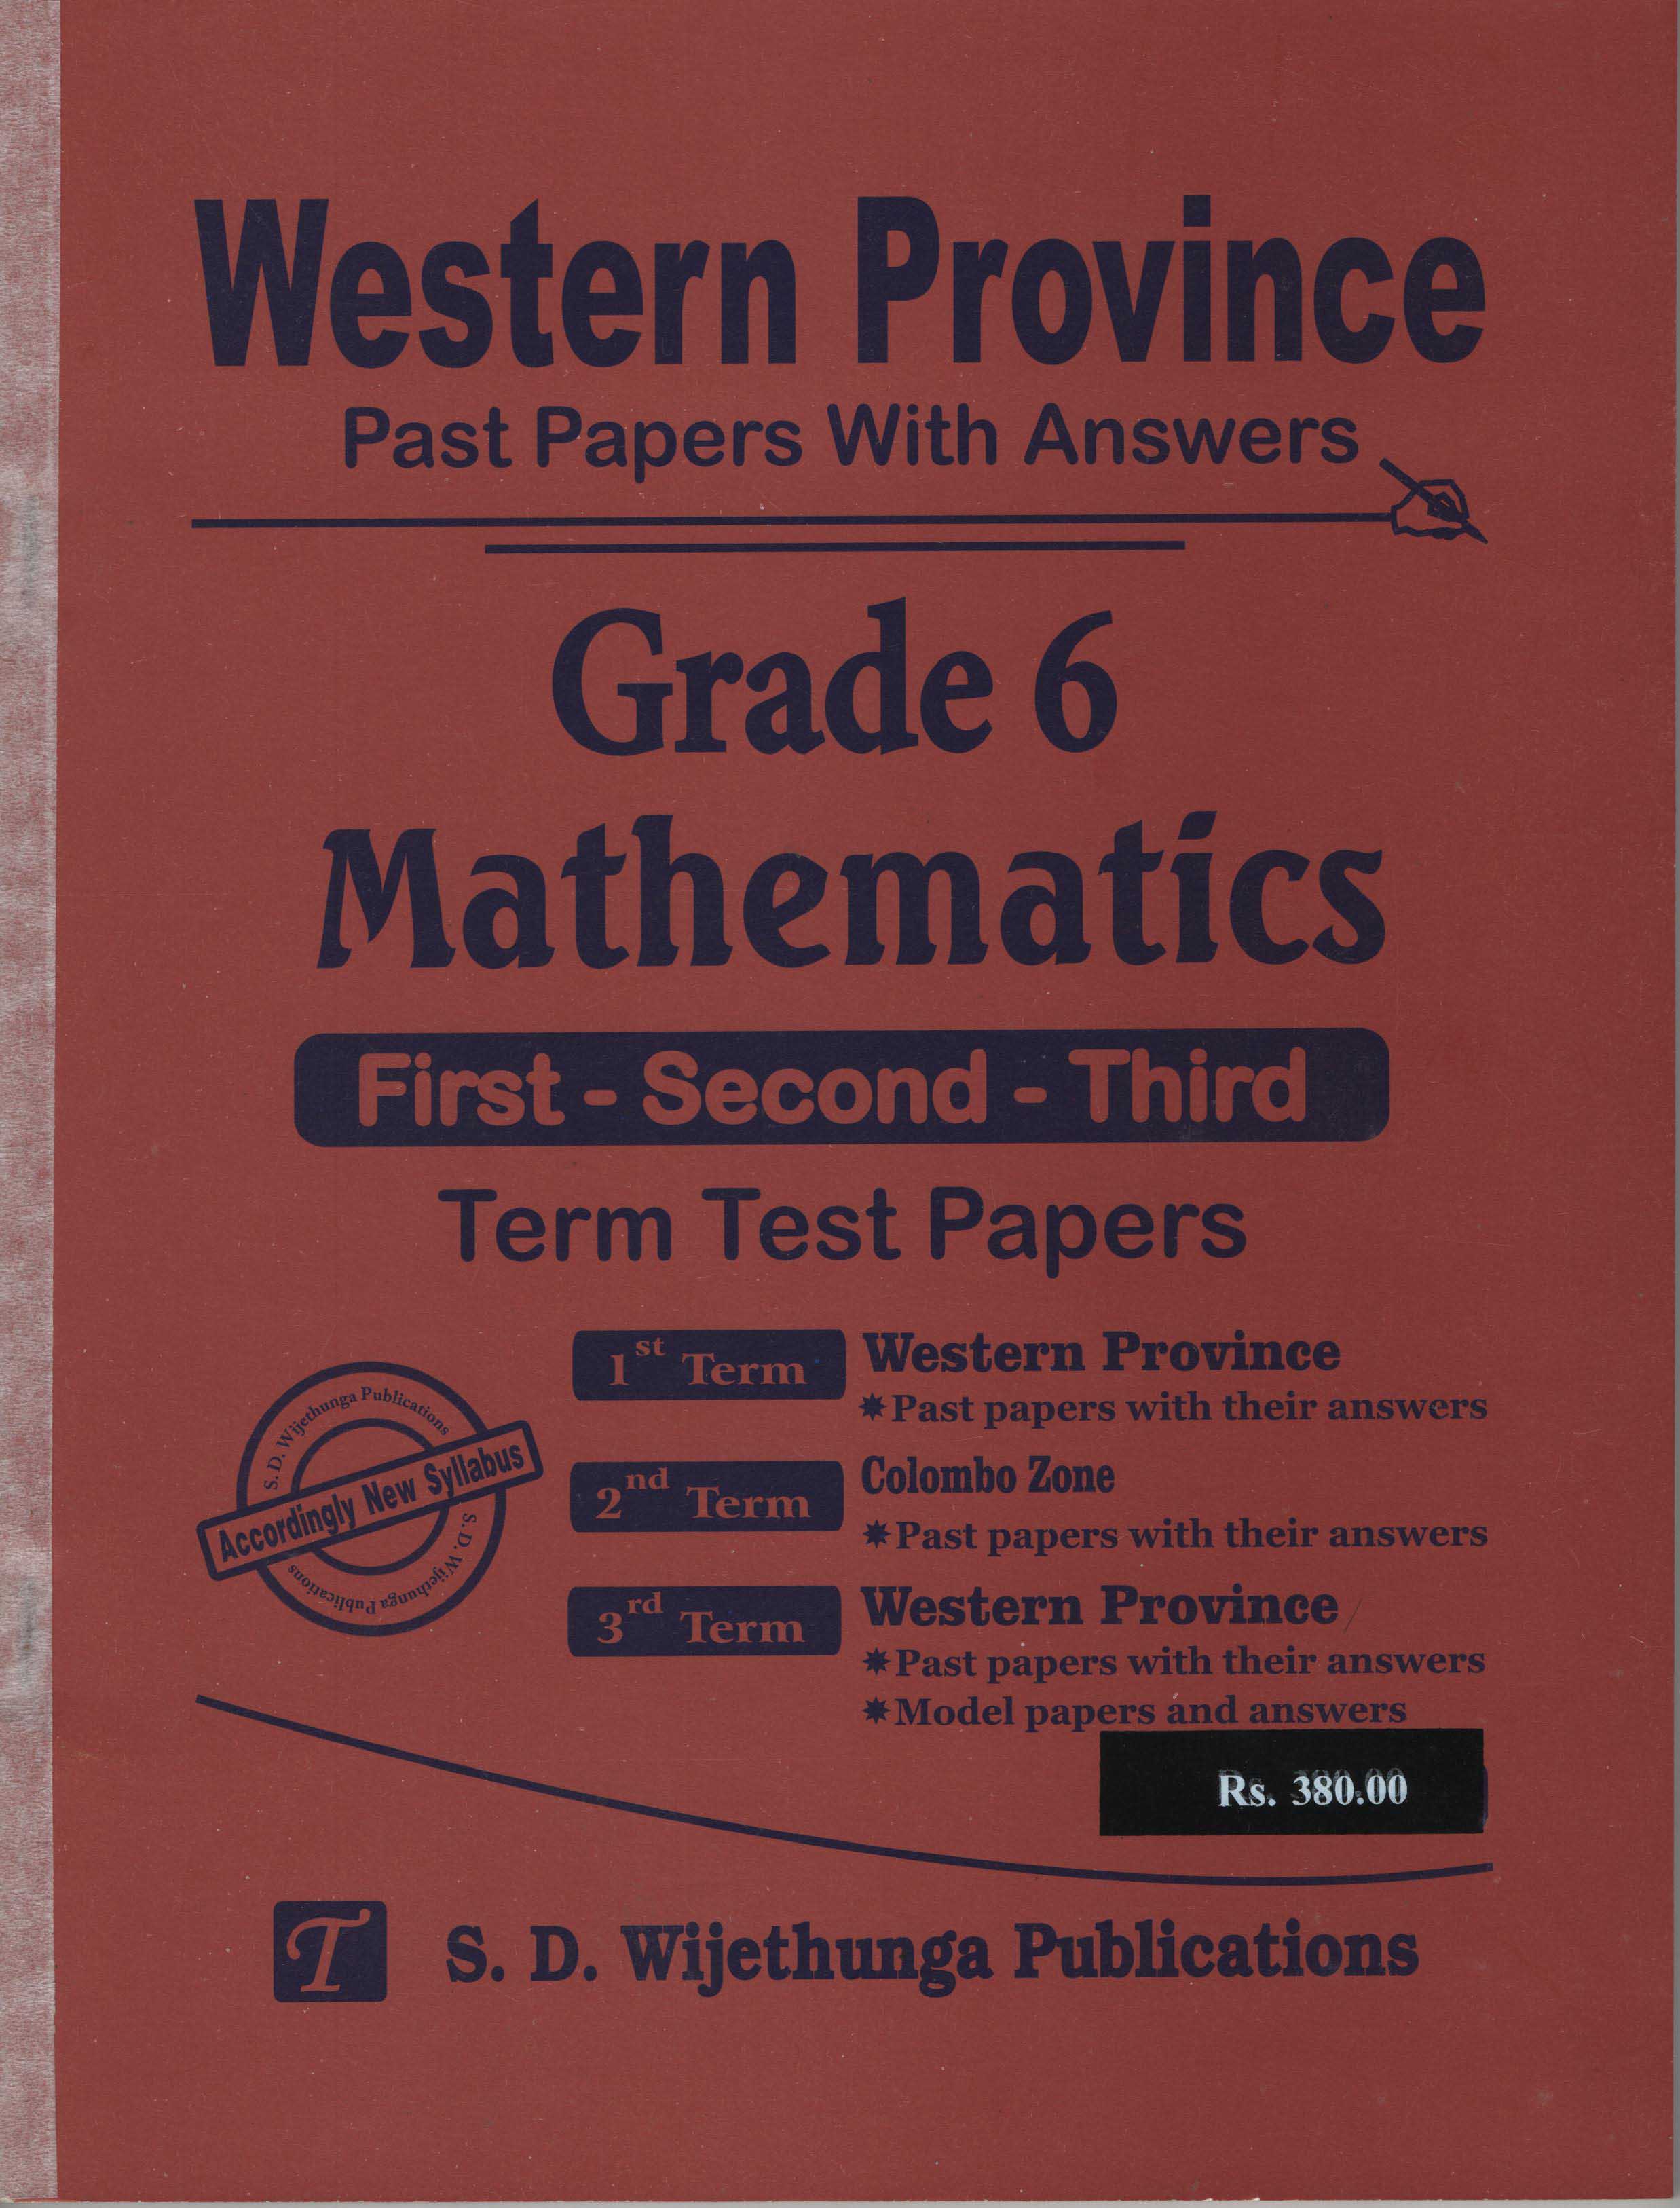 Wester Province Past Papers with Answers Grade 6 Mathematics (First-Second-Third) Term Test Papers